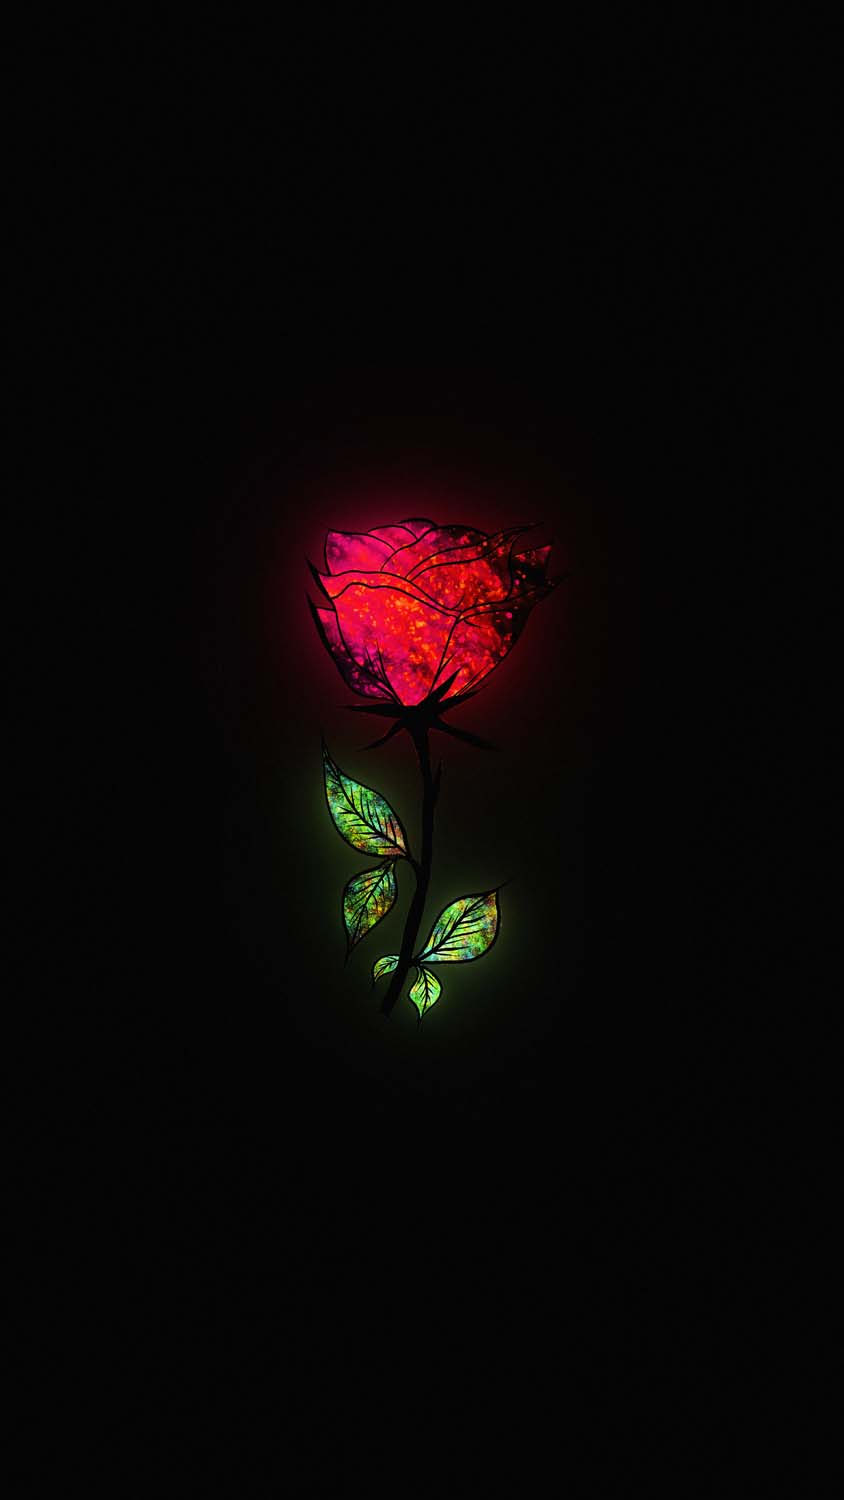 Glow Rose IPhone Wallpaper HD - IPhone Wallpapers : iPhone Wallpapers